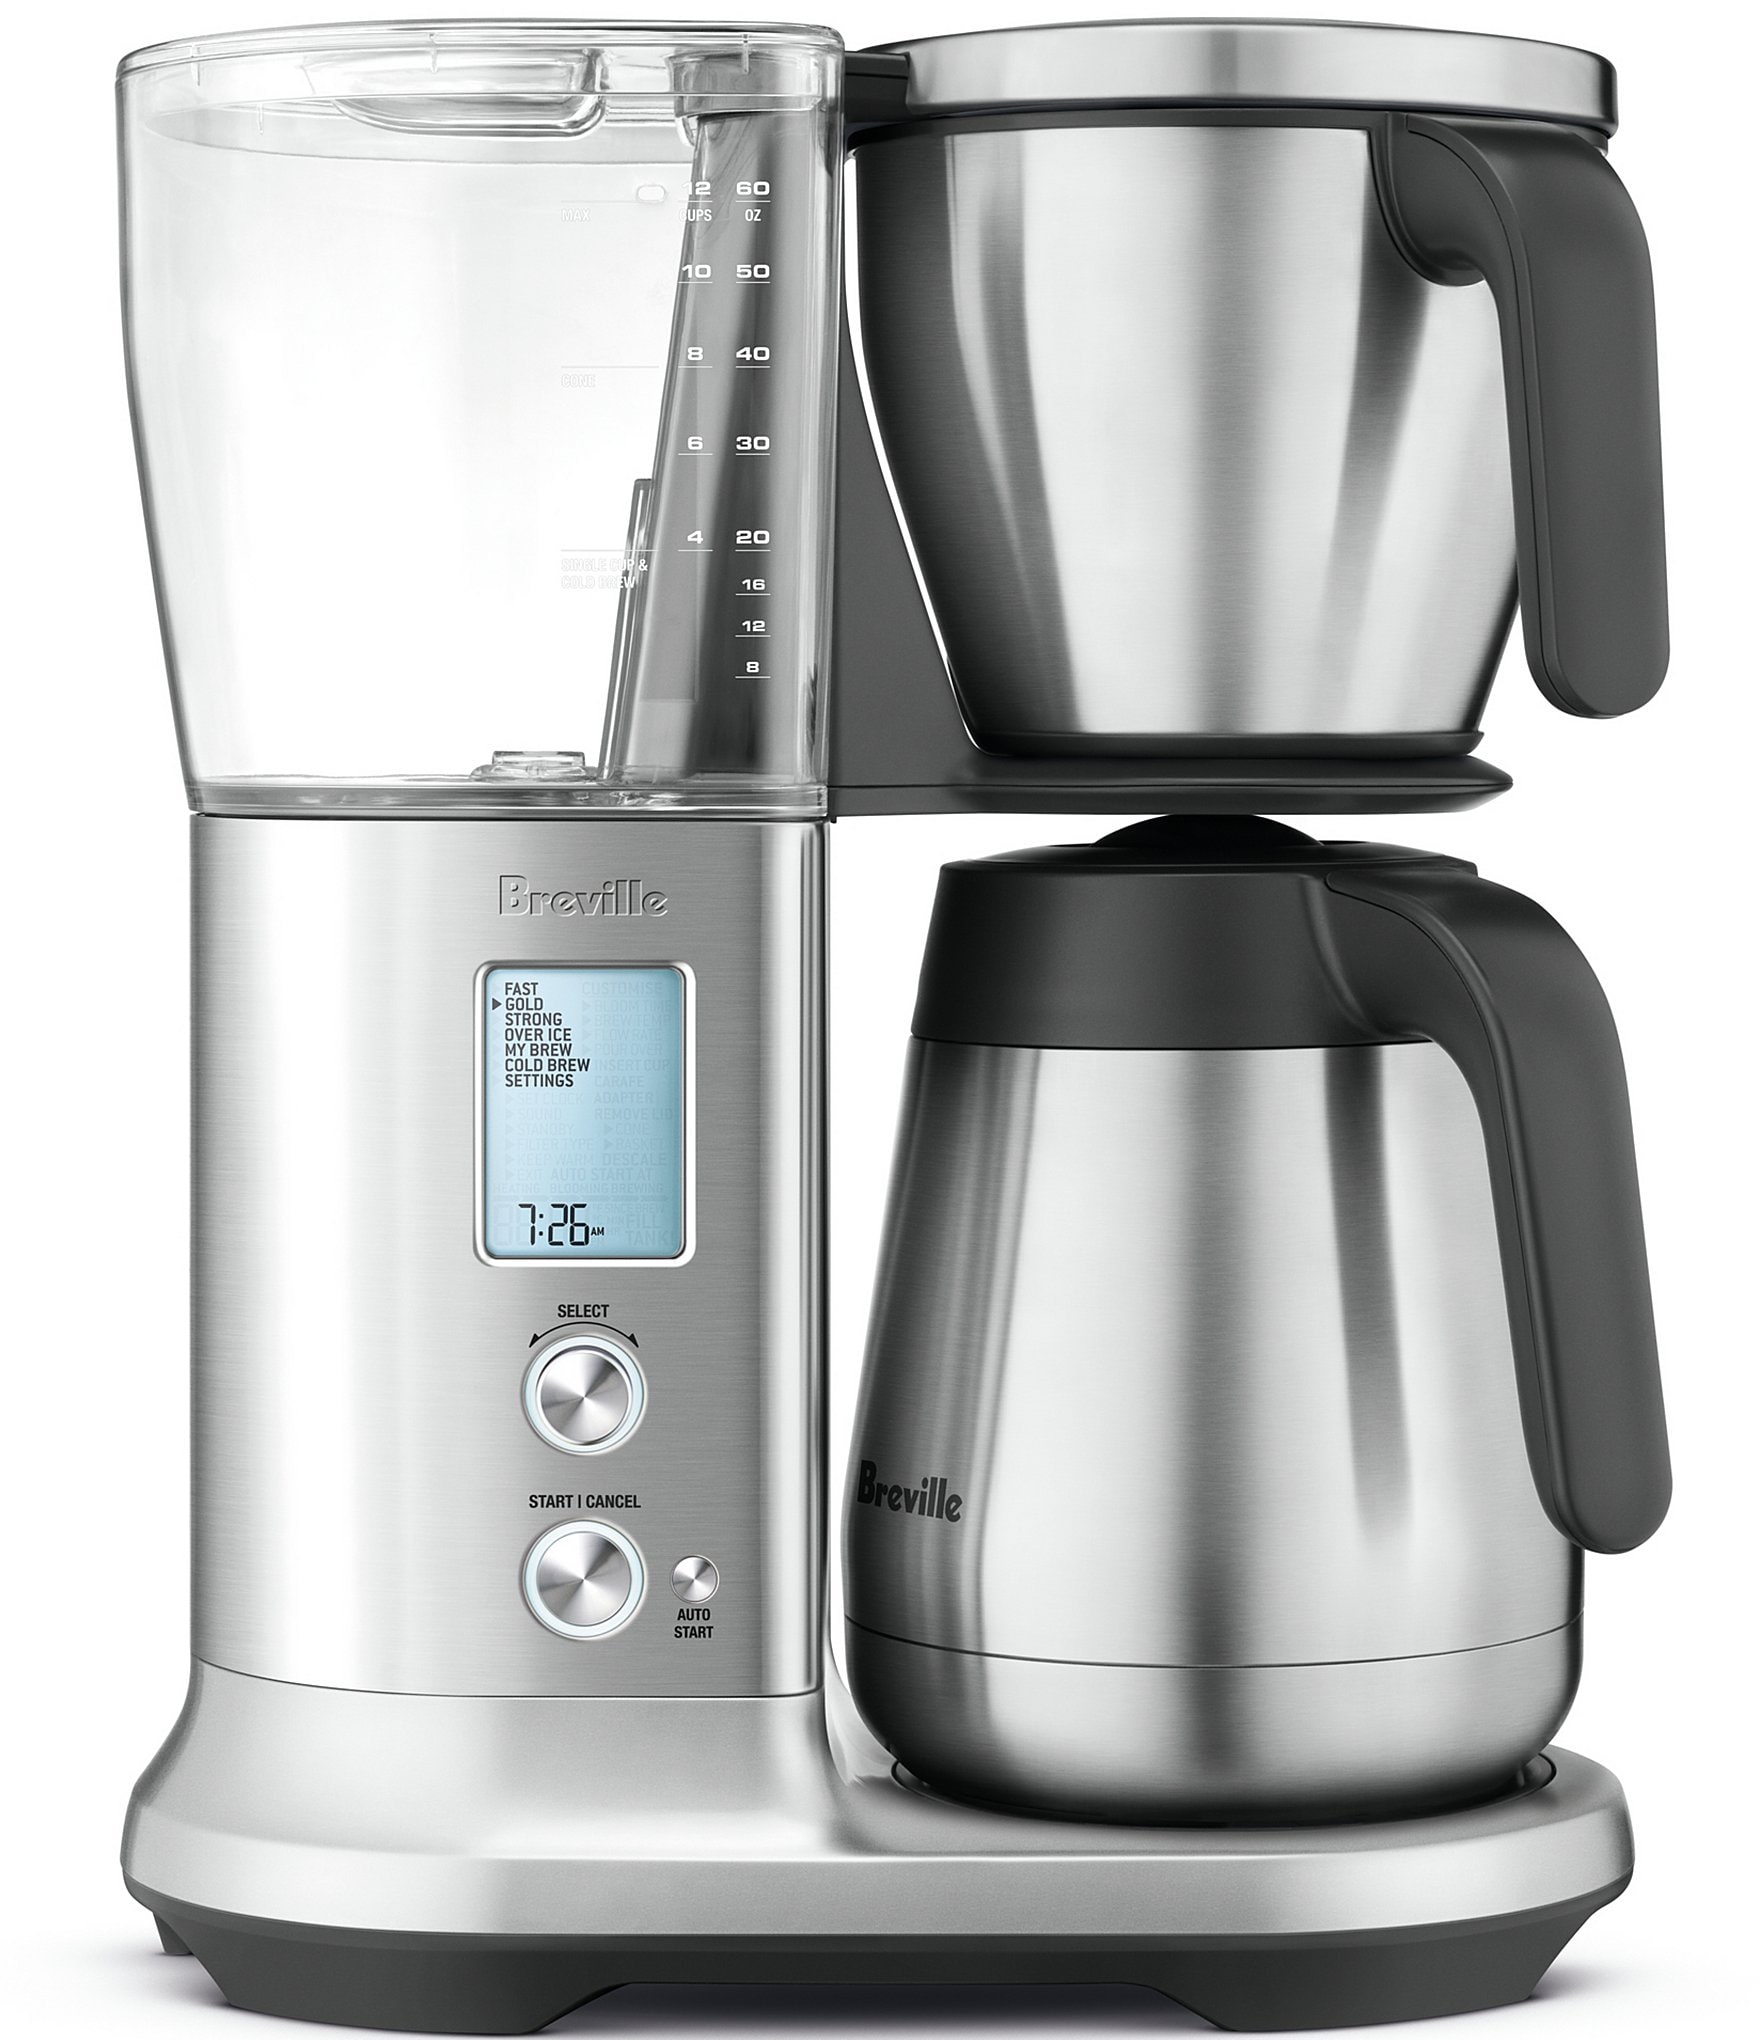 Breville Gourmet Stainless Steel Single Cup Brewer BKC700XL Coffee Maker